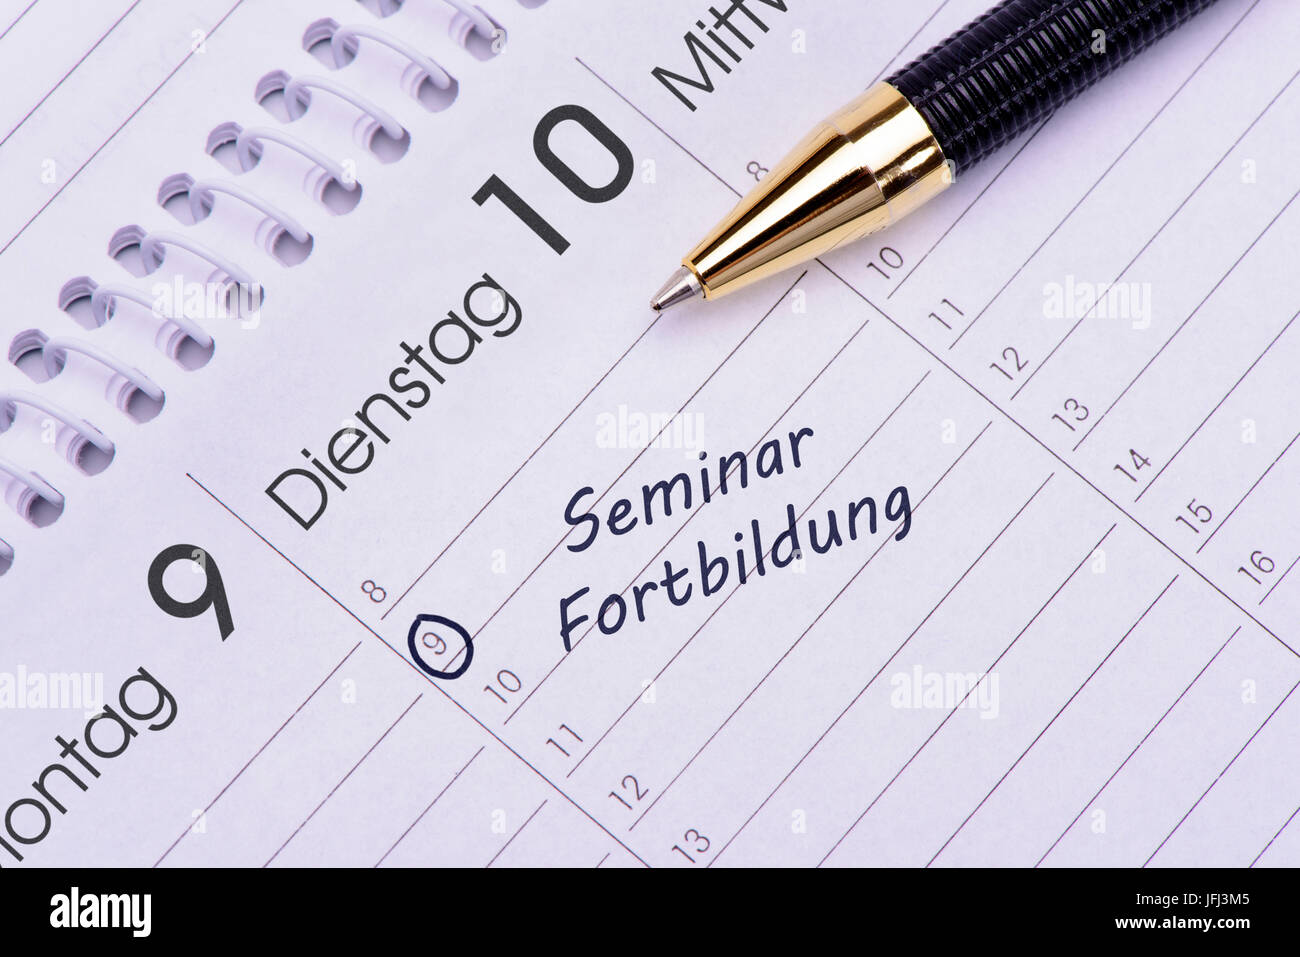 Seminar and continuing education as an entry in the appointment calendar Stock Photo